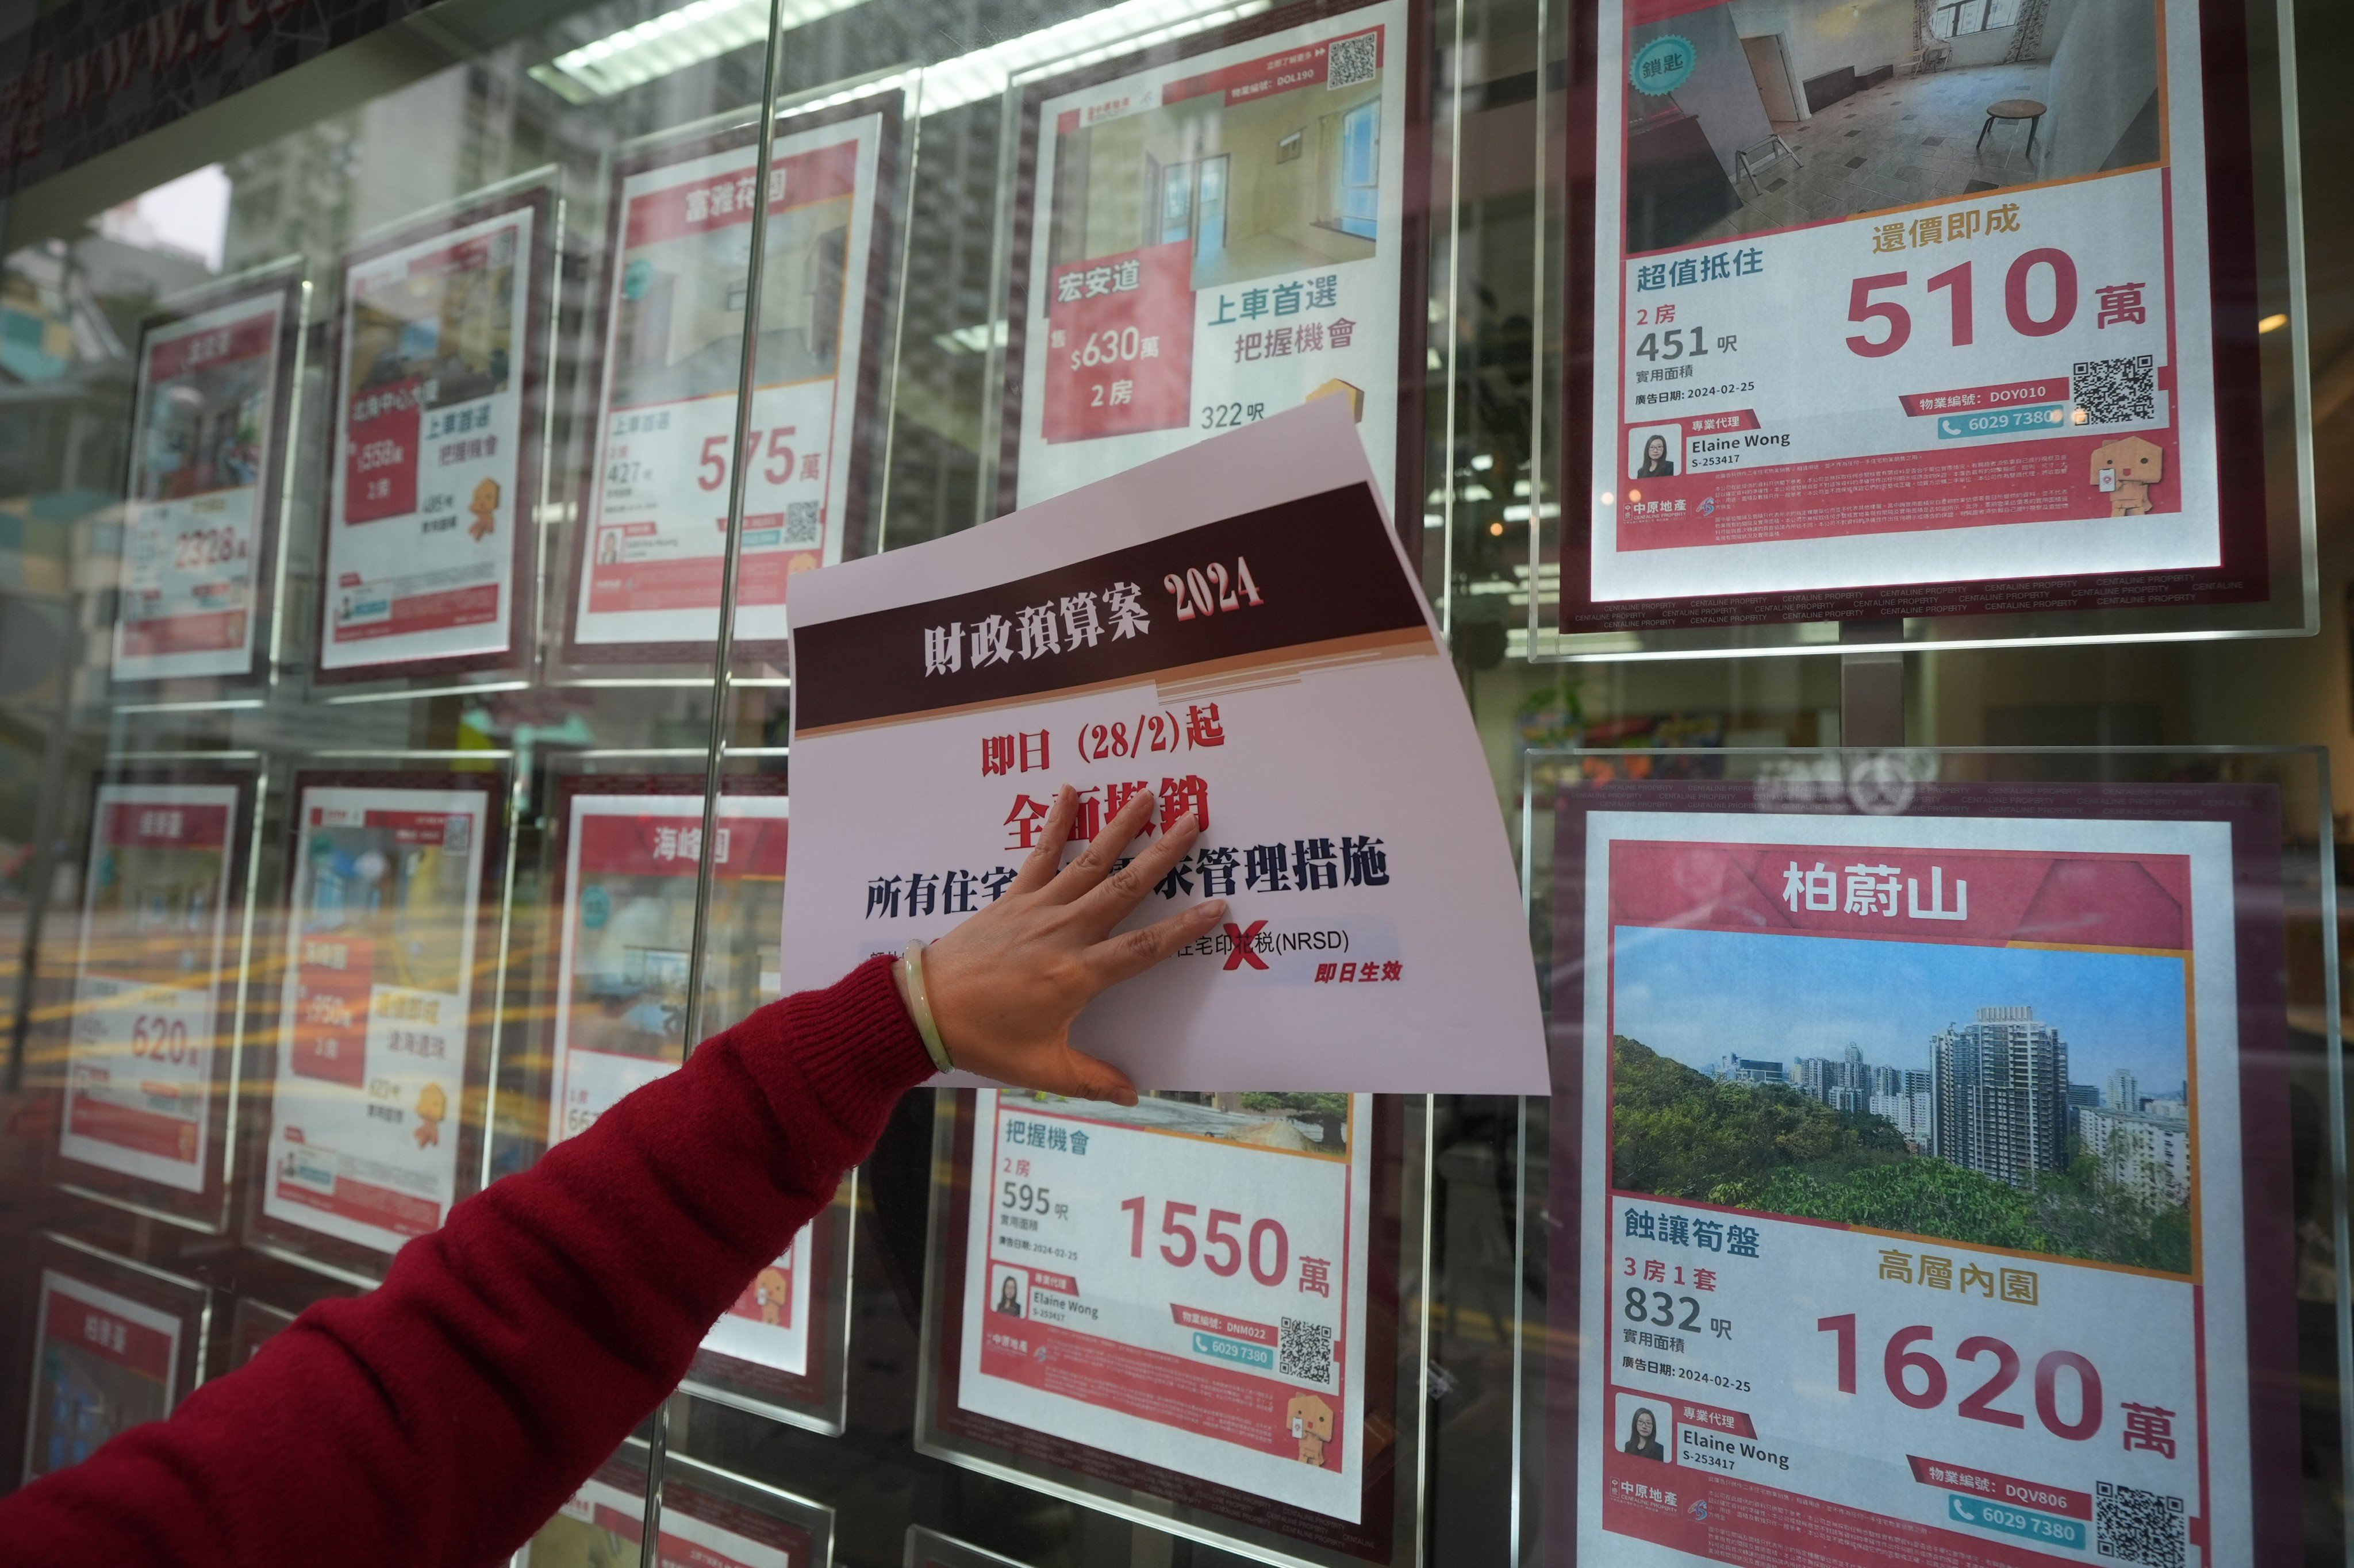 A property agent’s office in Hong Kong’s Fortress Hill. The number of transactions is expected to surge by 80 per cent to 5,750 deals this month, Ricacorp Properties says. Photo: Eugene Lee